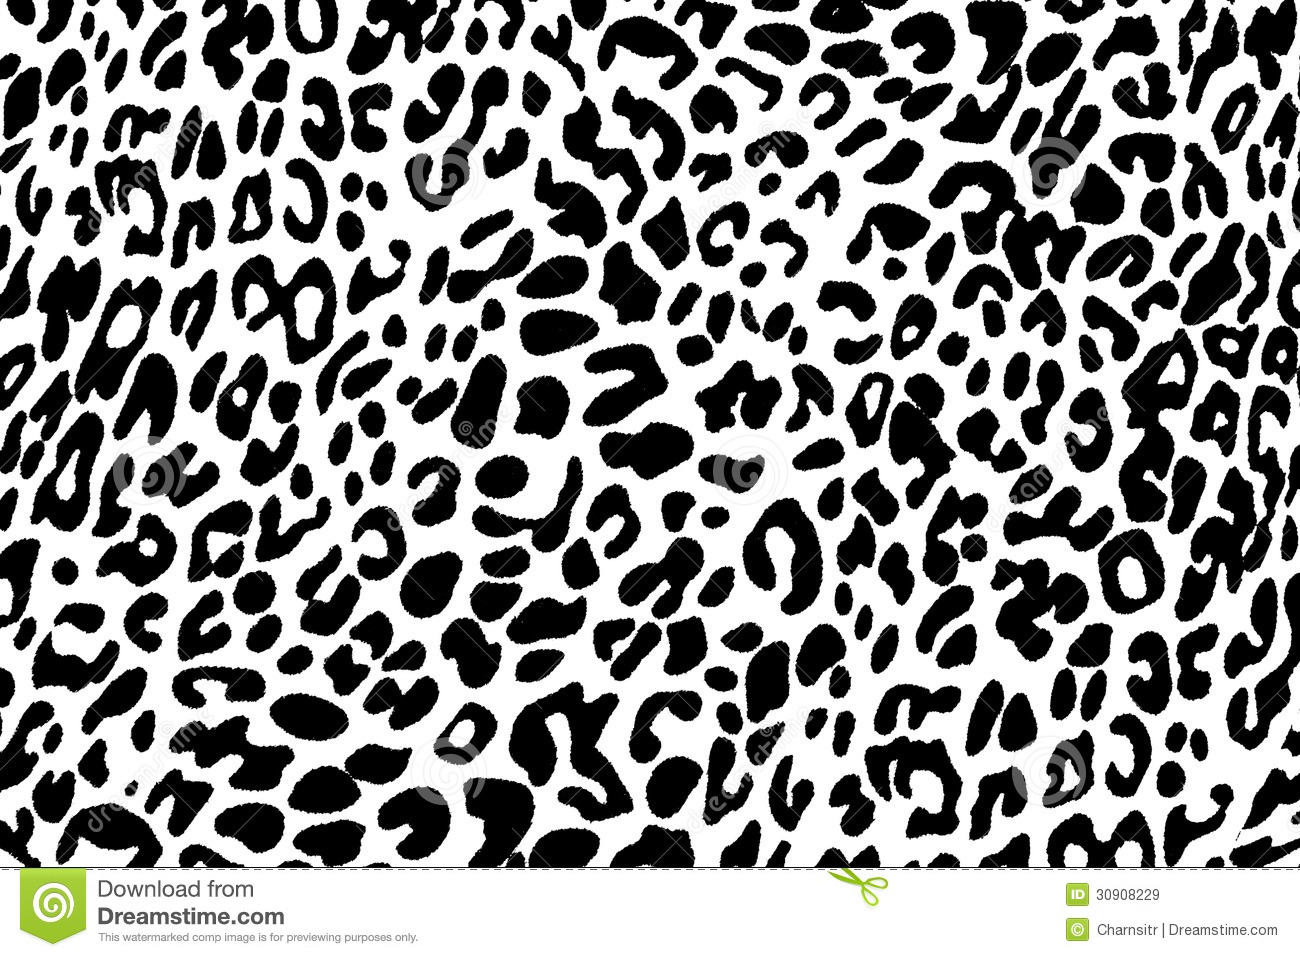 Leopard Print Black And White Cd Design With Animal